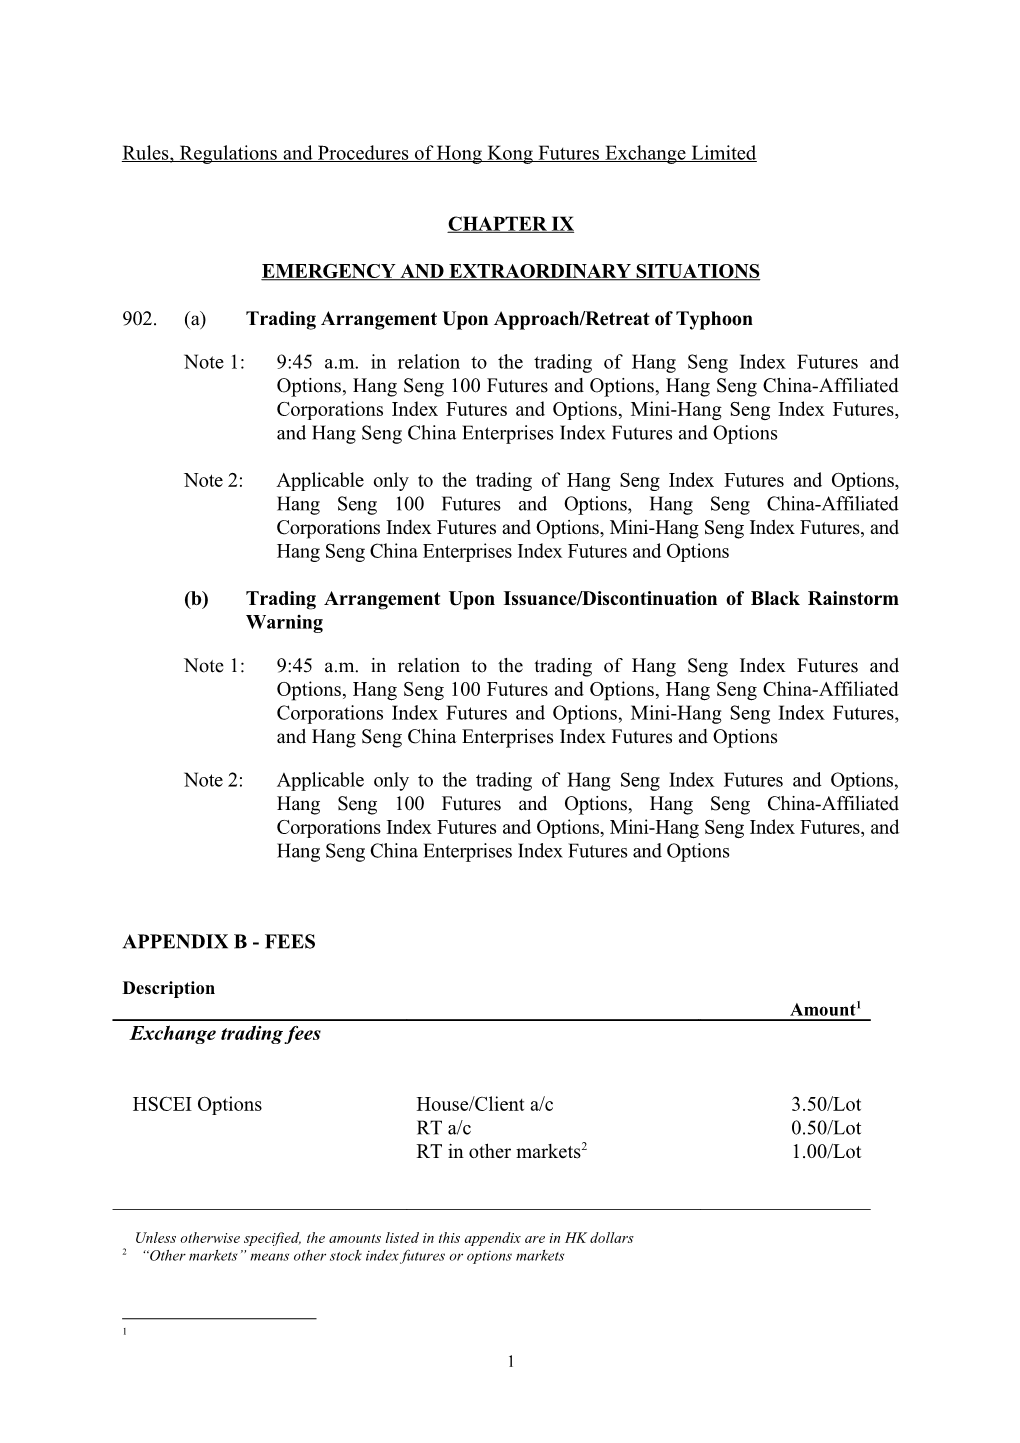 Rules, Regulations and Procedures of Hong Kong Futures Exchange Limited s2